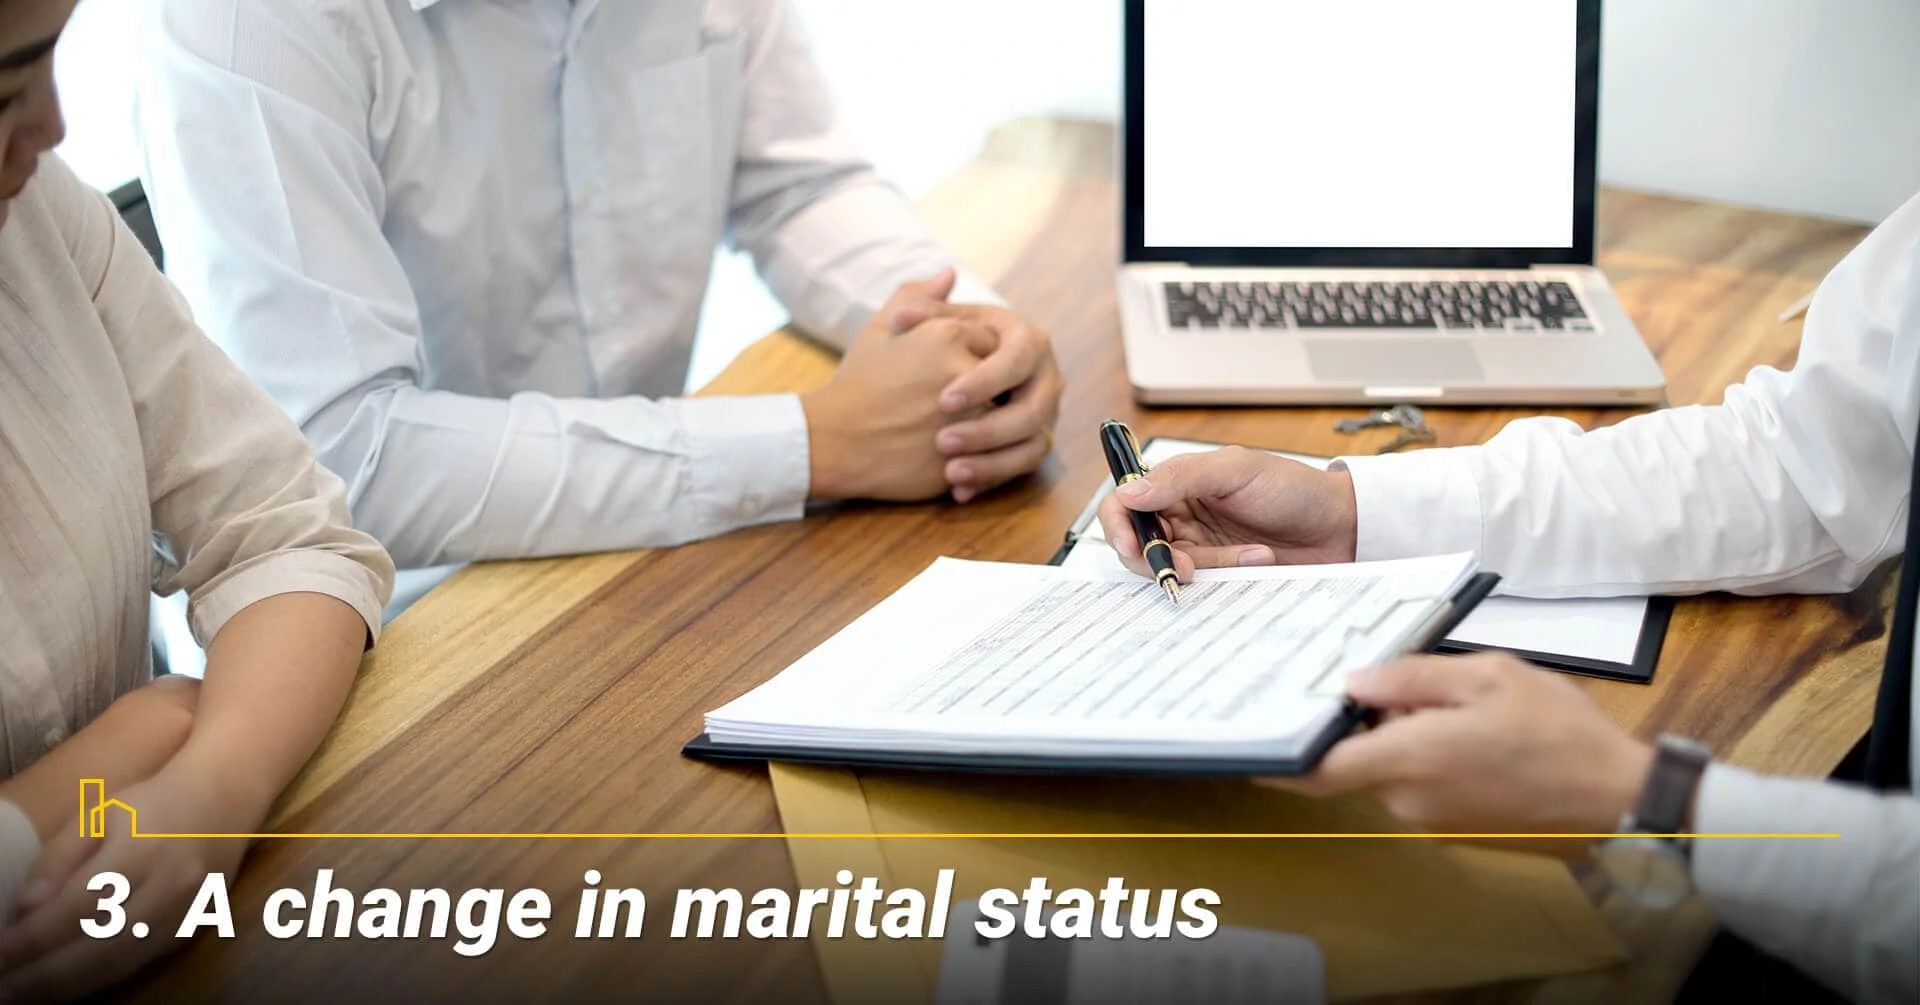 A change in marital status, getting married or divorced